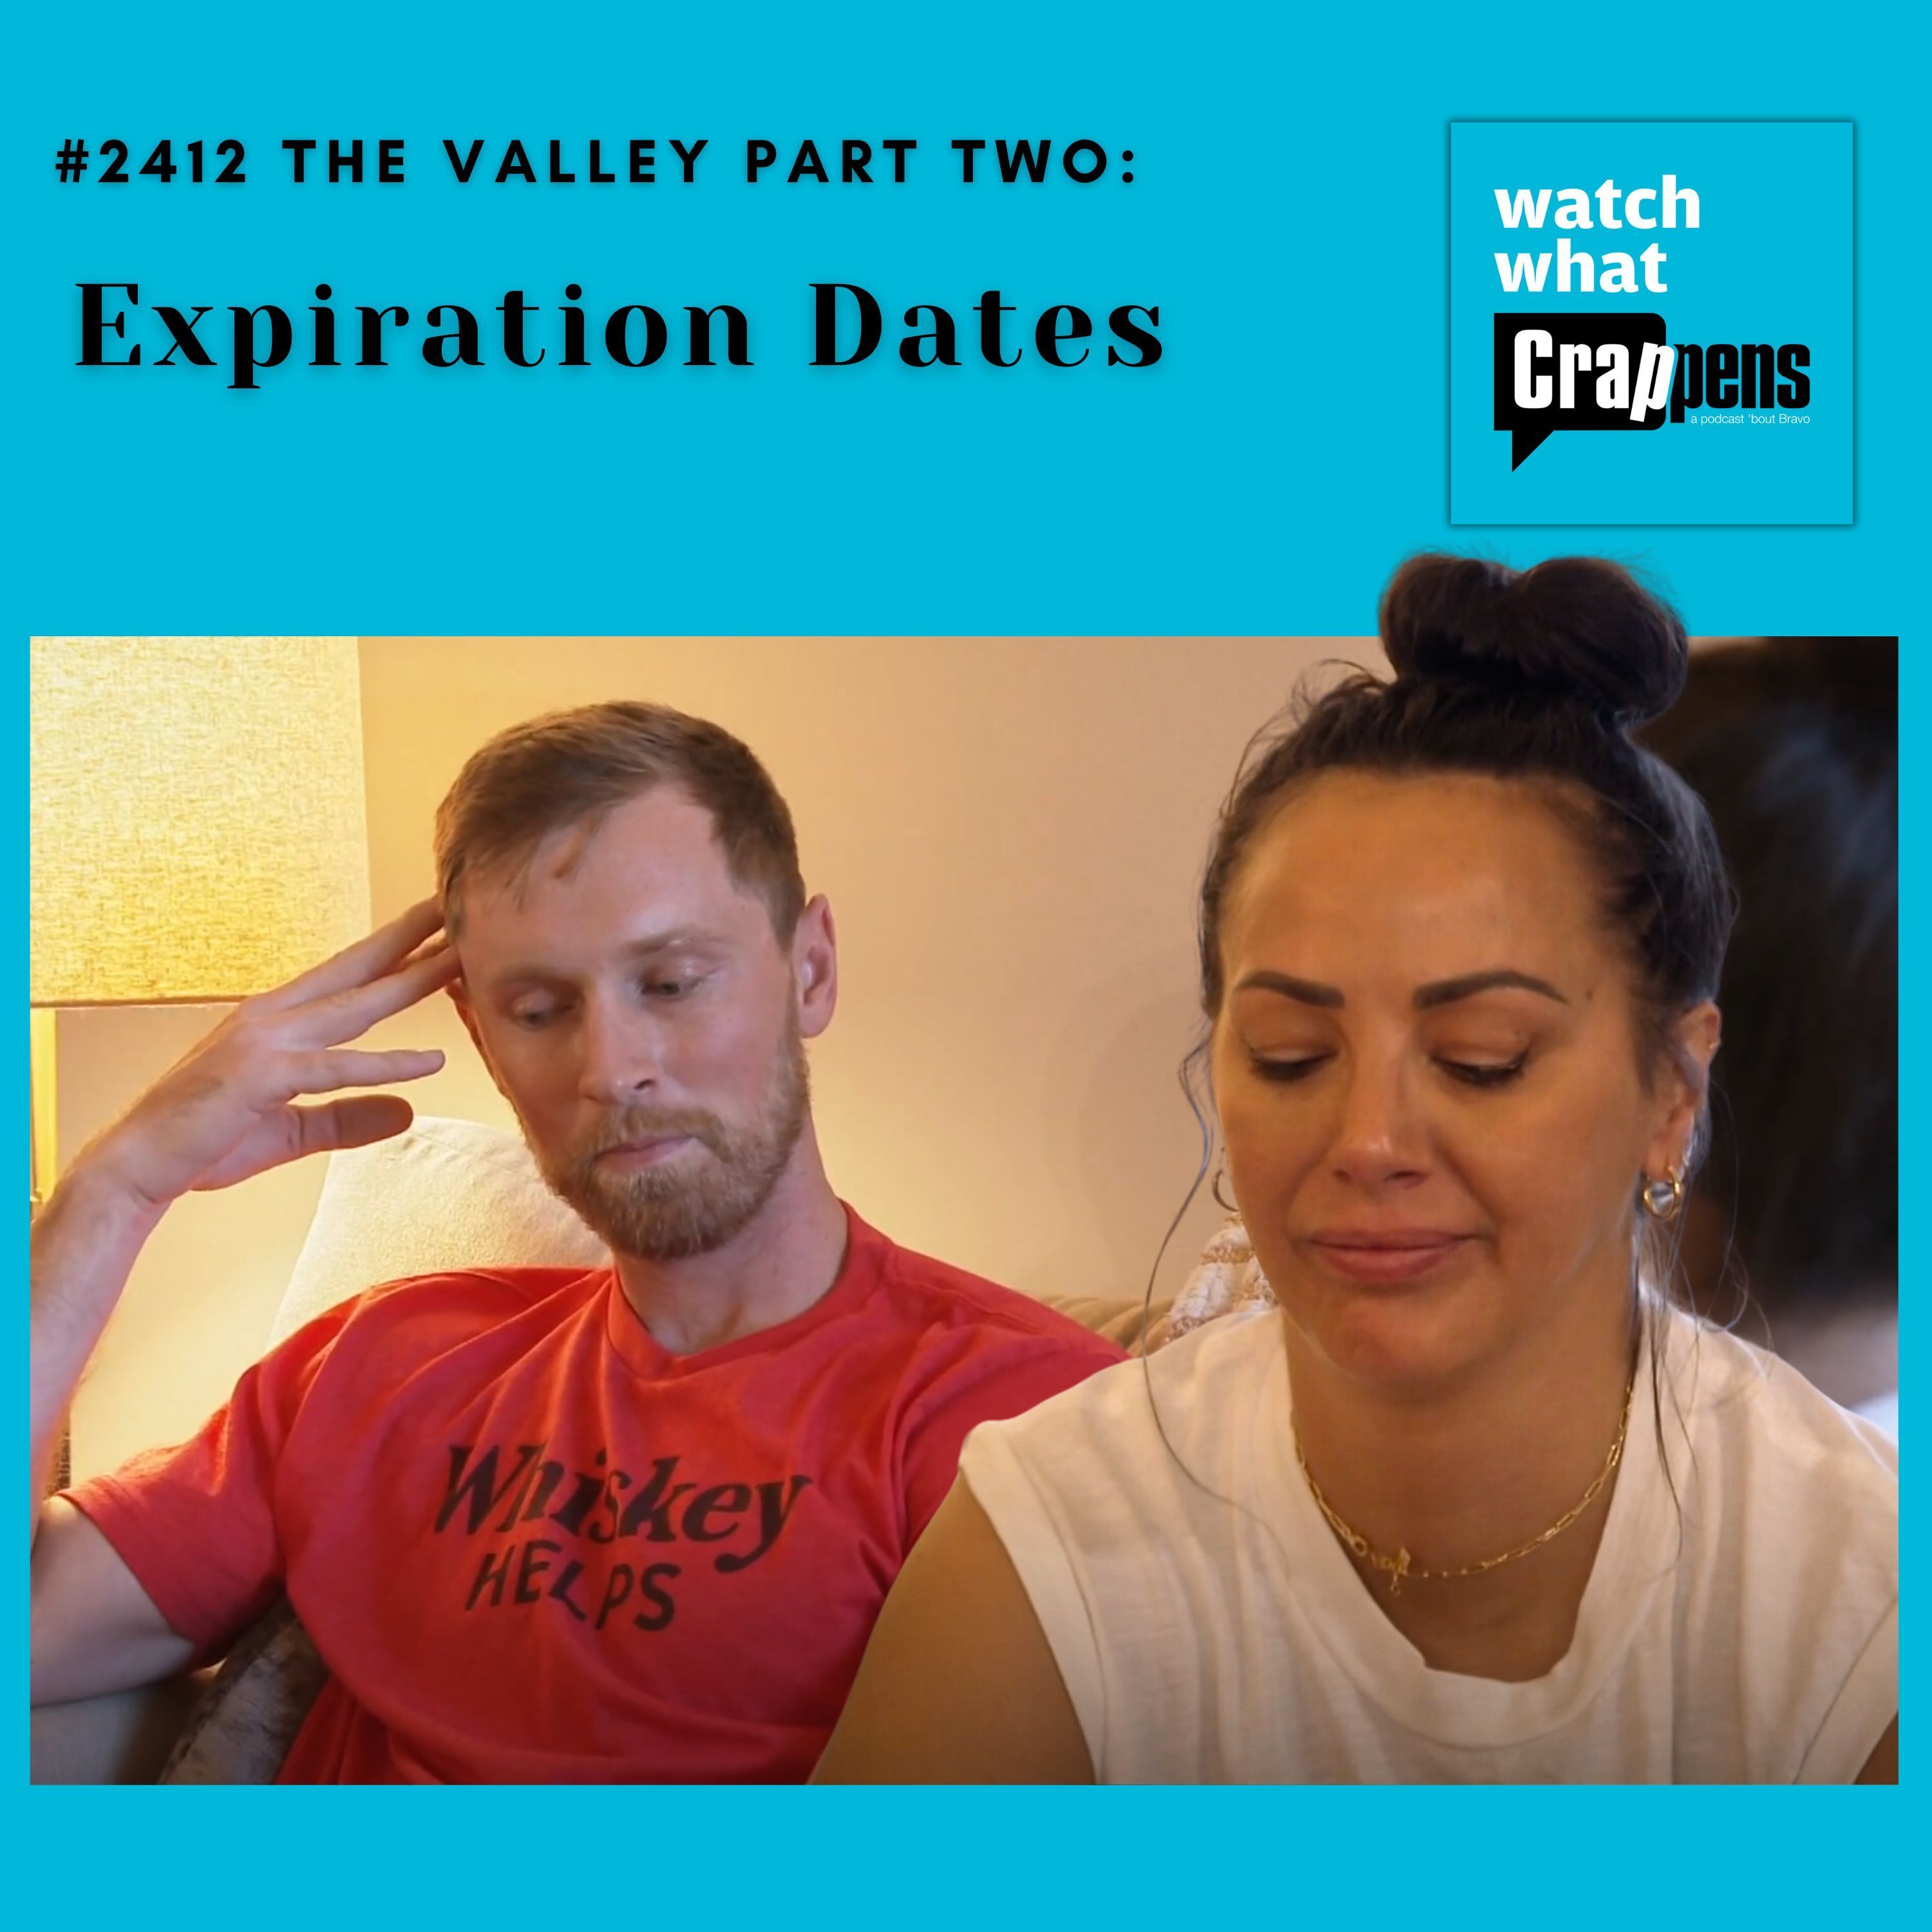 #2412 The Valley Part Two: Expiration Dates